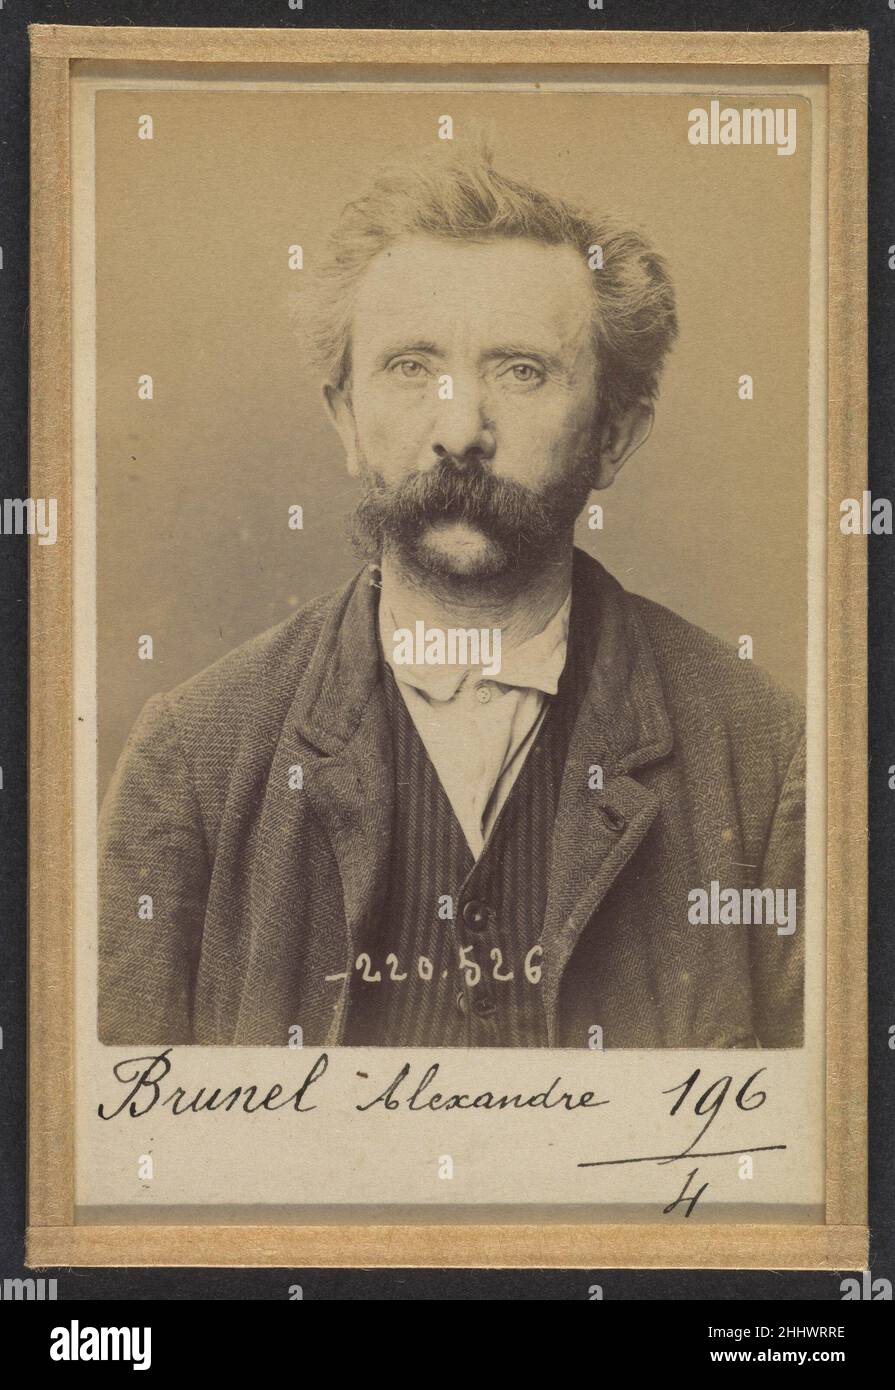 Bordes. Guillaume, Auguste. 40 ans, né à Centrayes (Aveyron). Tailleur. Pas de motif. 29/2/94. 1894 Alphonse Bertillon Born into a distinguished family of scientists and statisticians, Bertillon began his career as a clerk in the Identification Bureau of the Paris Prefecture of Police in 1879. Tasked with maintaining reliable police records of offenders, he developed the first modern system of criminal identification. The system, which became known as Bertillonage, had three components: anthropometric measurement, precise verbal description of the prisoner’s physical characteristics, and stand Stock Photo